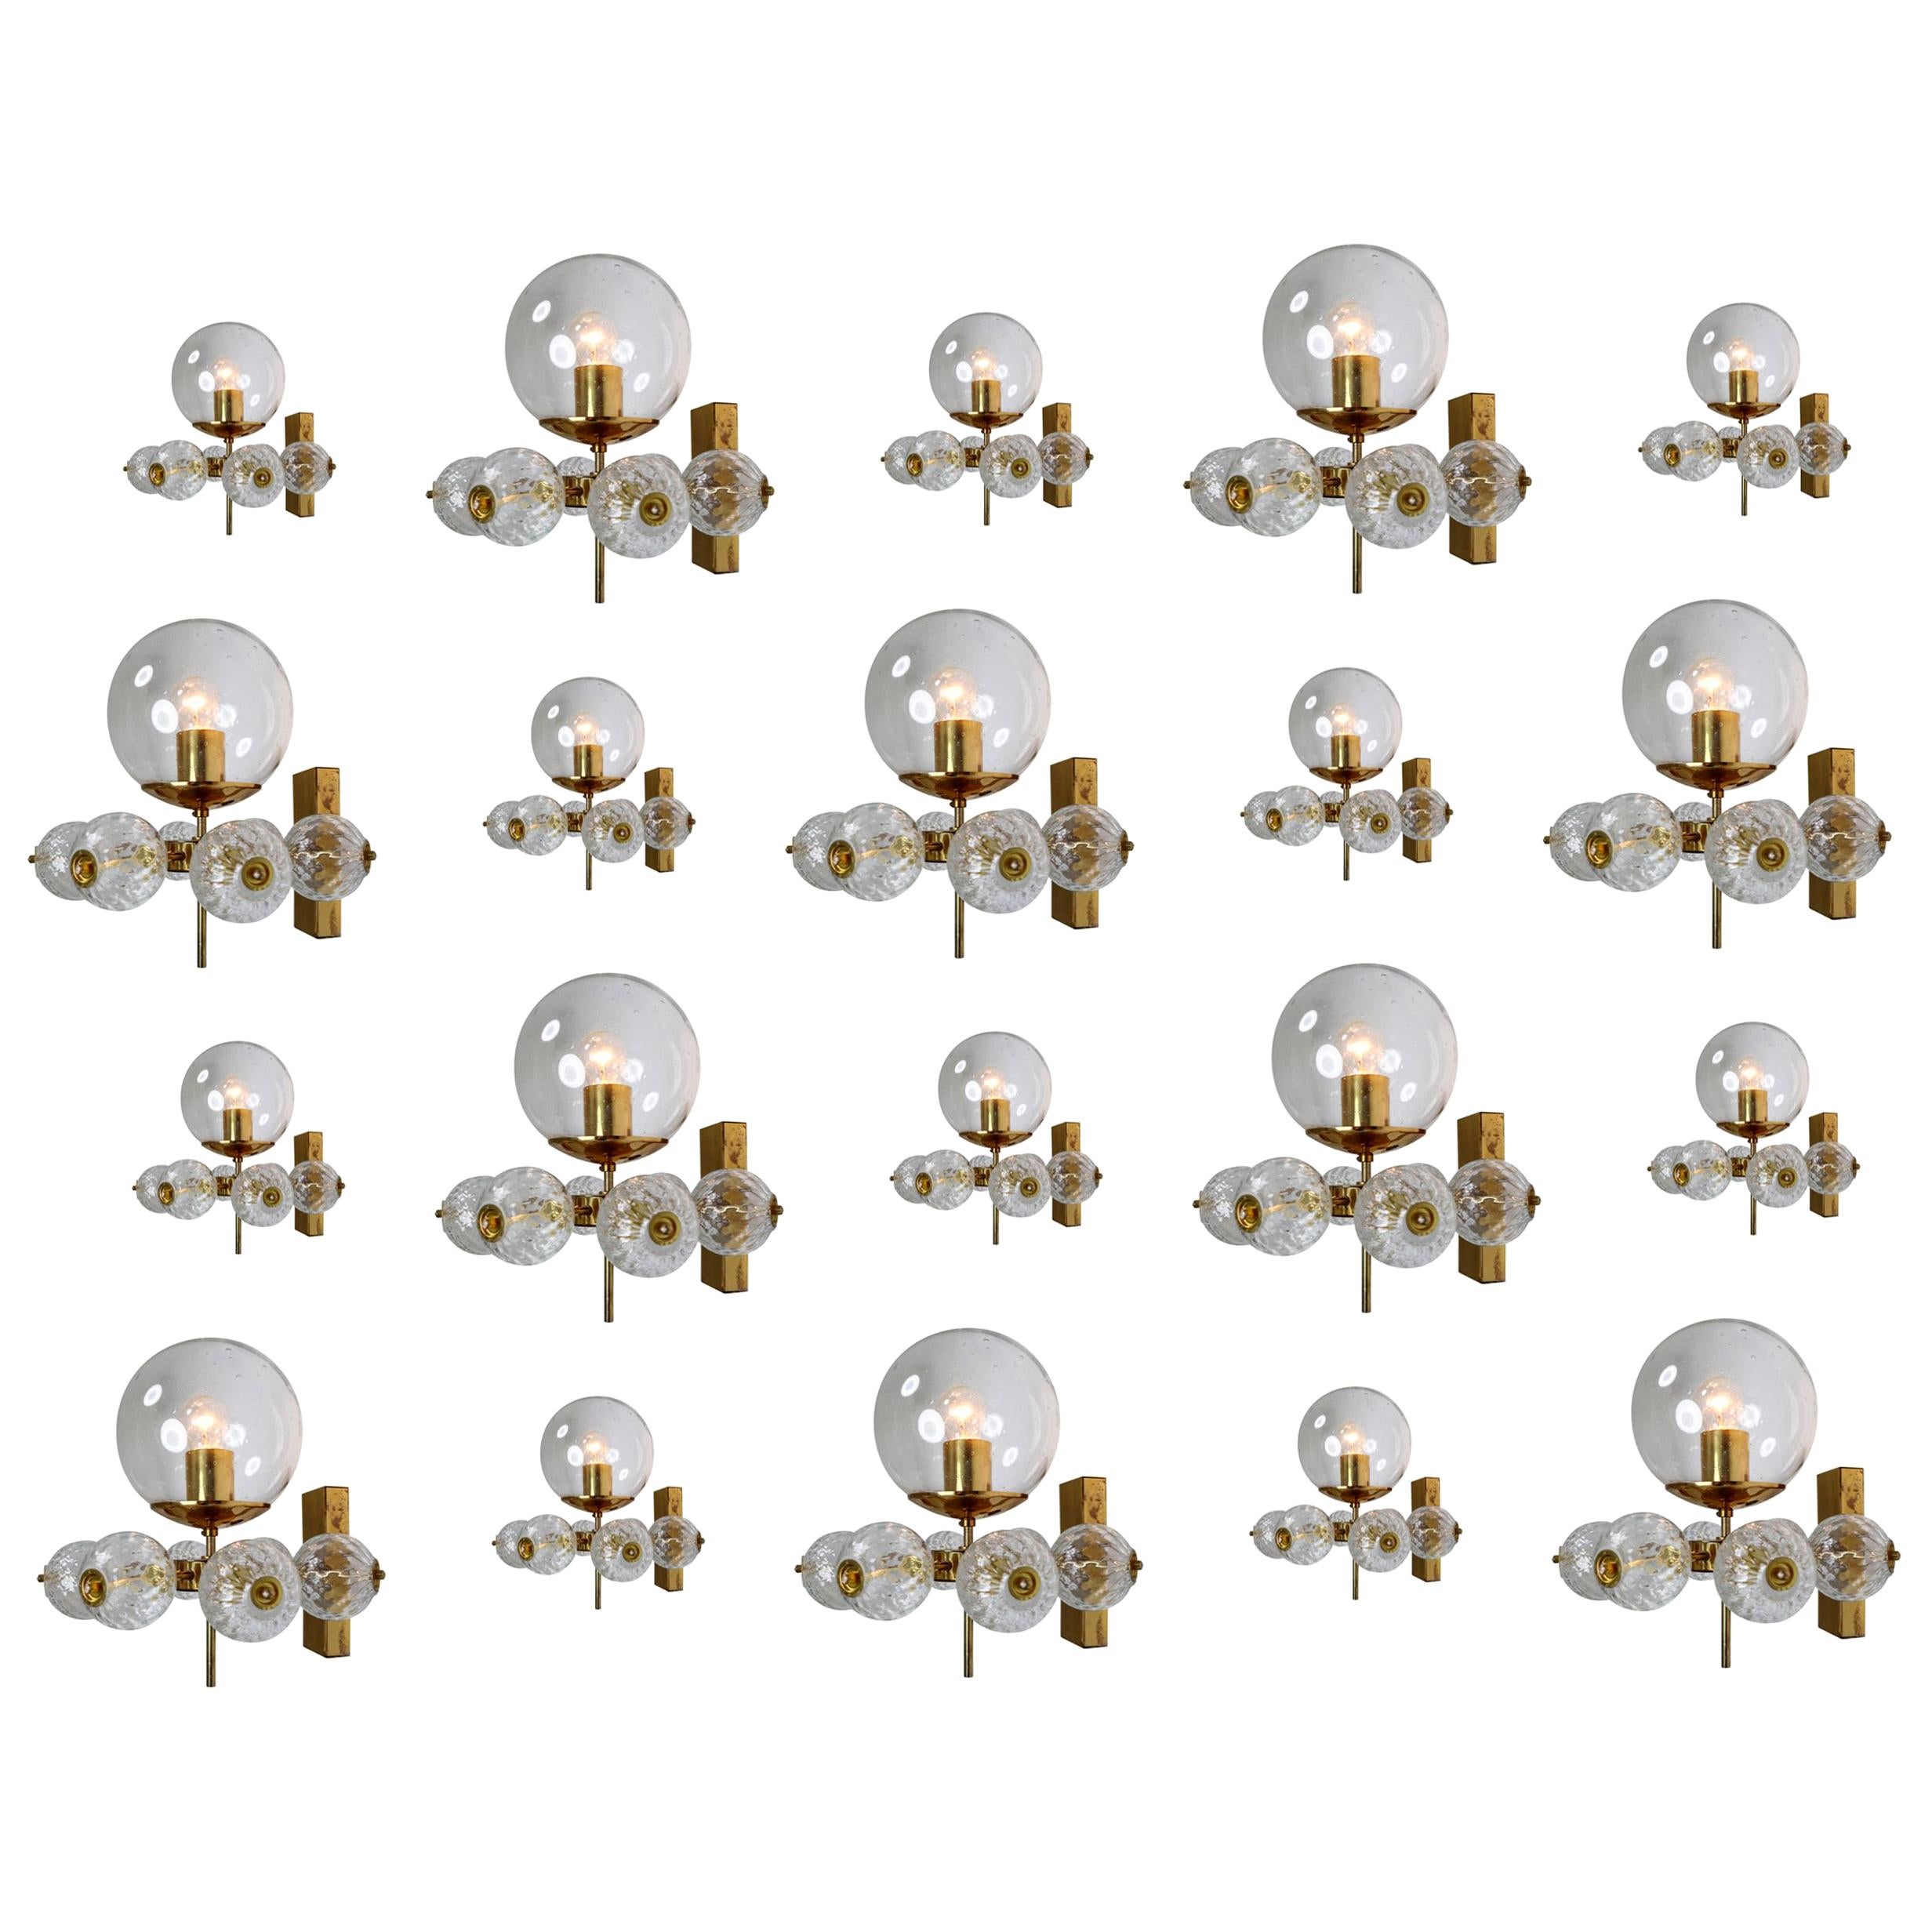 Large Set Midcentury Hotel Wall Chandeliers with Brass Fixture, Europe 1970s